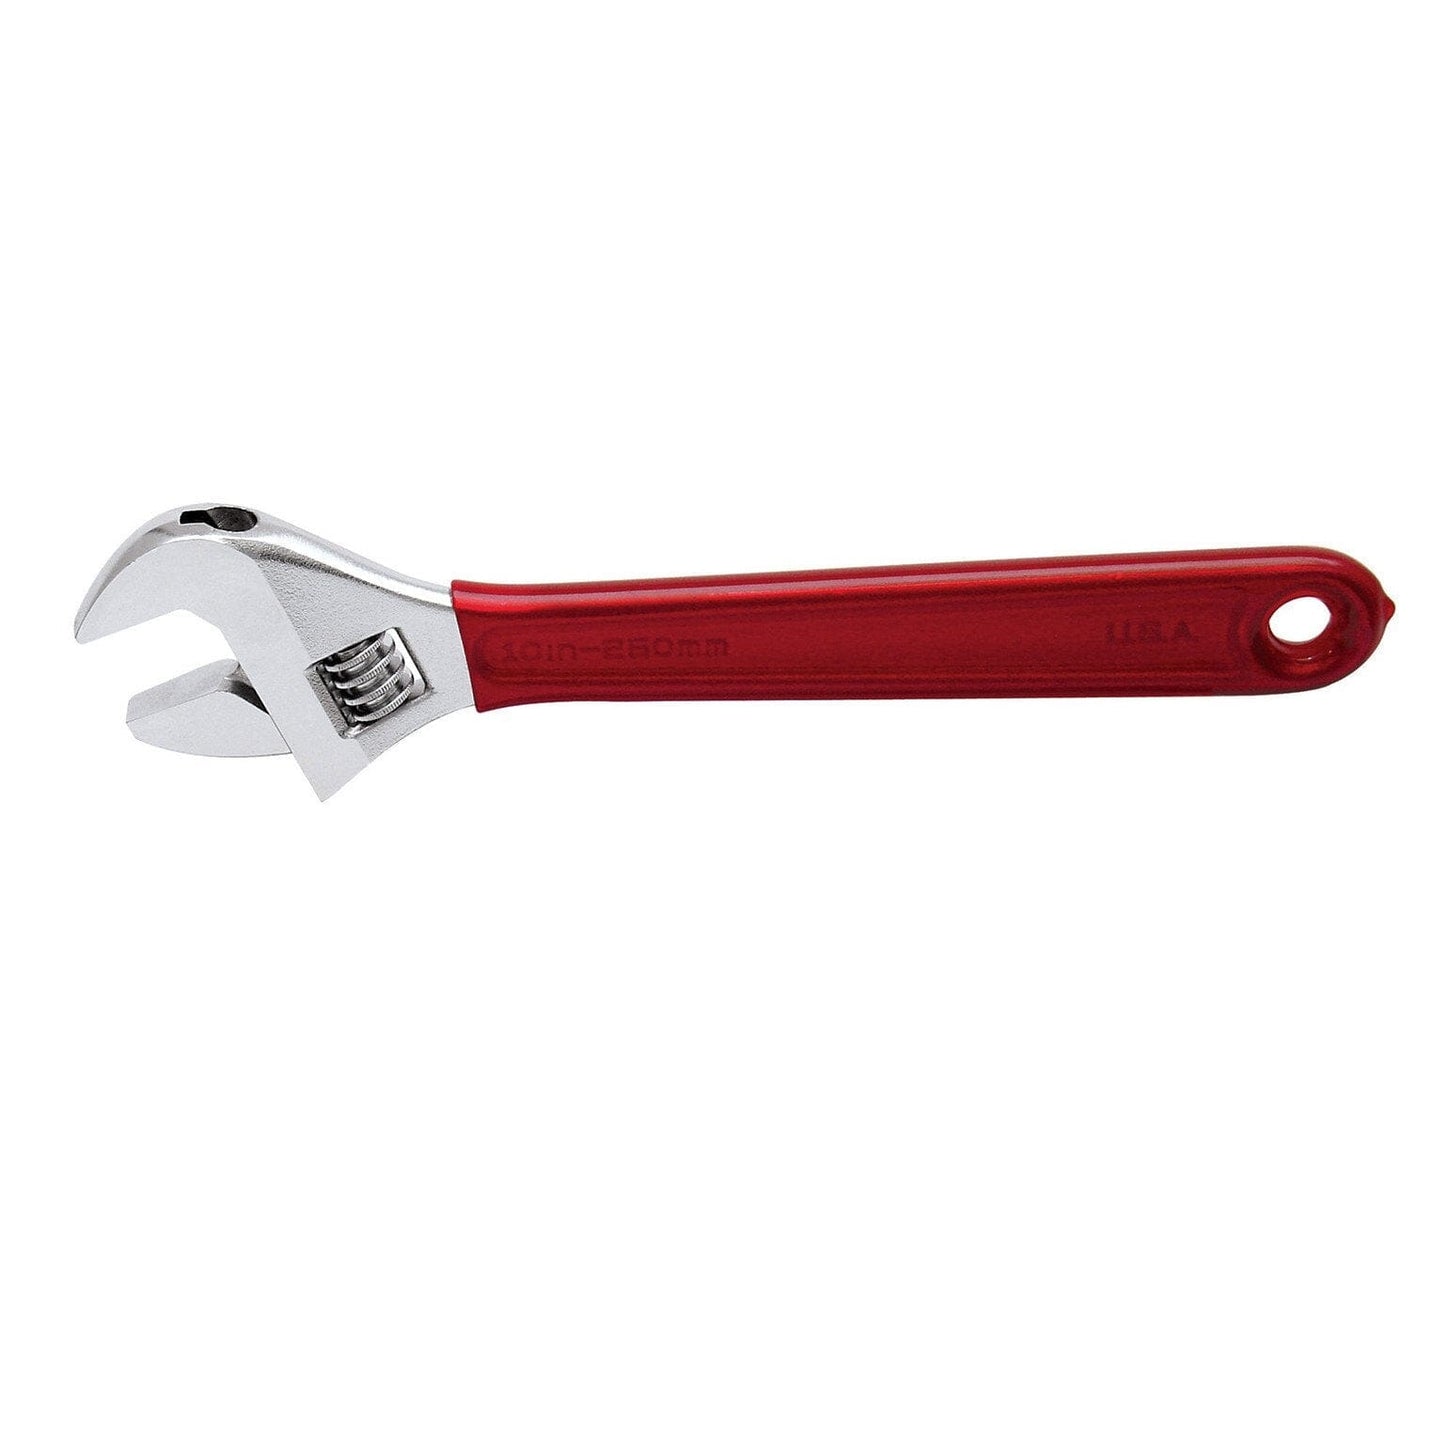 Klein Adjustable Wrench Extra Capacity, 12-Inch - D507-12 Wrenches Klein Tools 